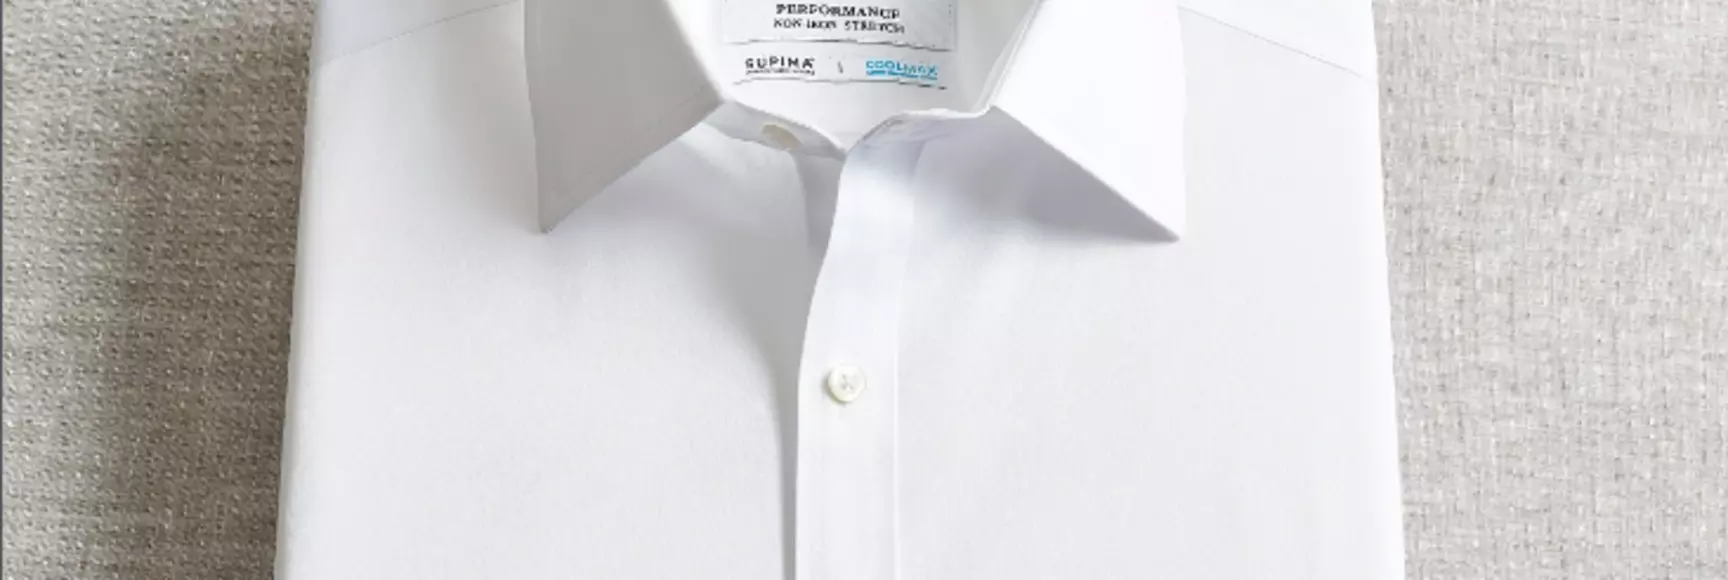 COOLMAX® technology powers a new line of breathable Brooks Brothers cooling dress shirts with moisture-wicking performance.